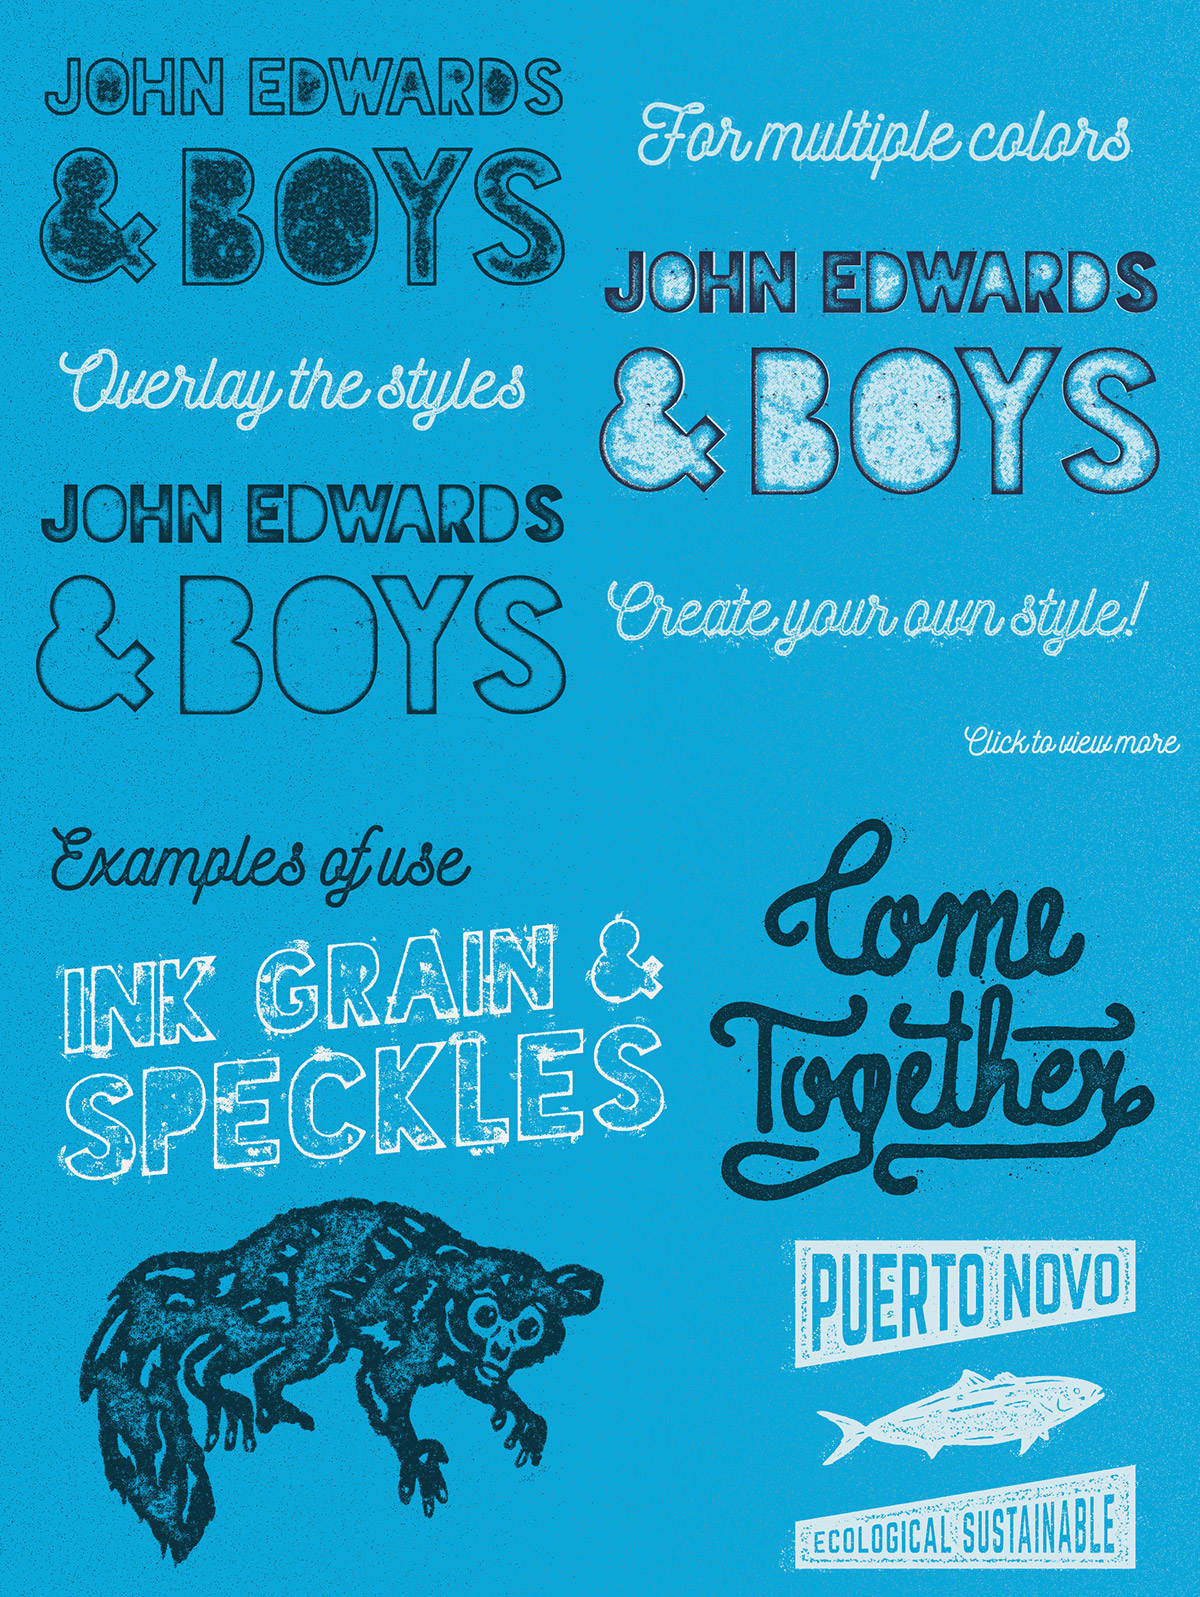 lettering speckles adobe illustrator graphic styles actions textures ink grain vintage Retro inked text effects effects handmade handprinted press